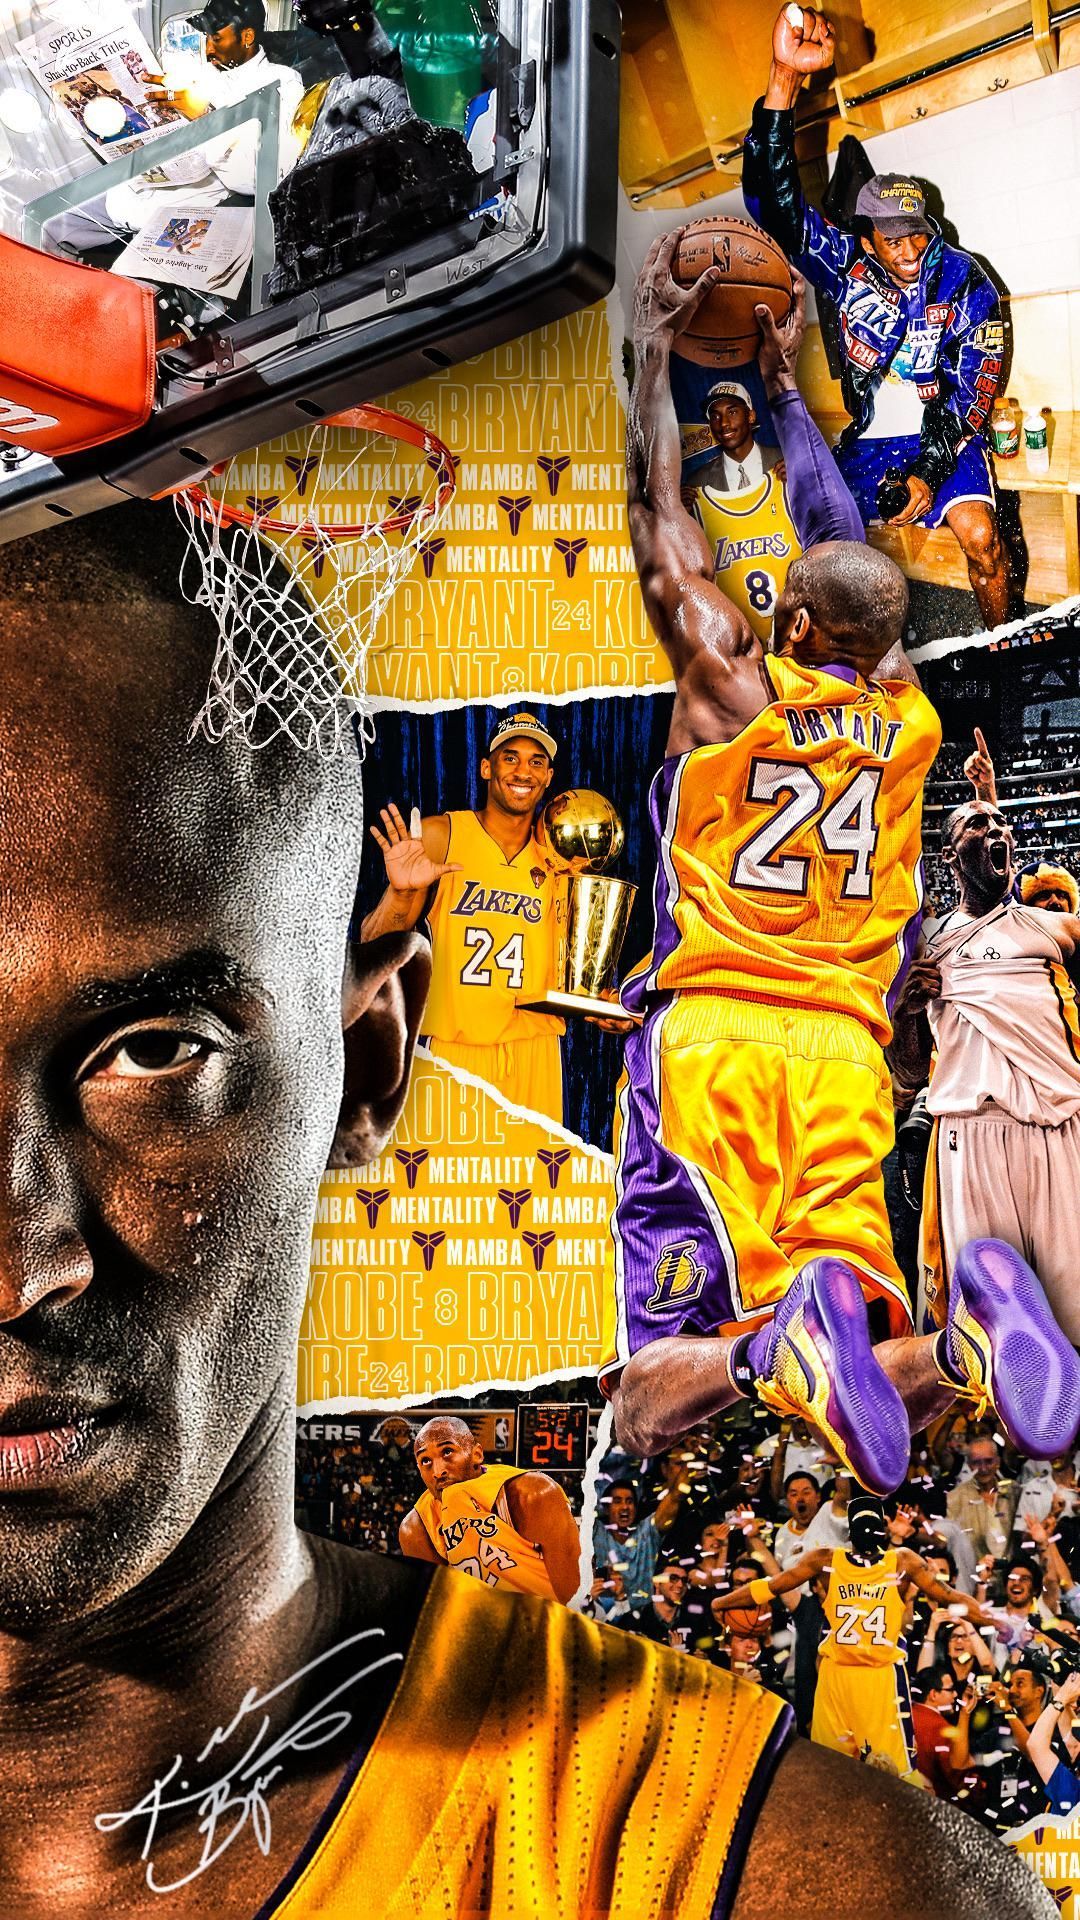 Kobe Bryant Wallpaper for mobile phone, tablet, desktop computer and other devices HD and 4K wall. Kobe bryant picture, Kobe bryant poster, Kobe bryant wallpaper